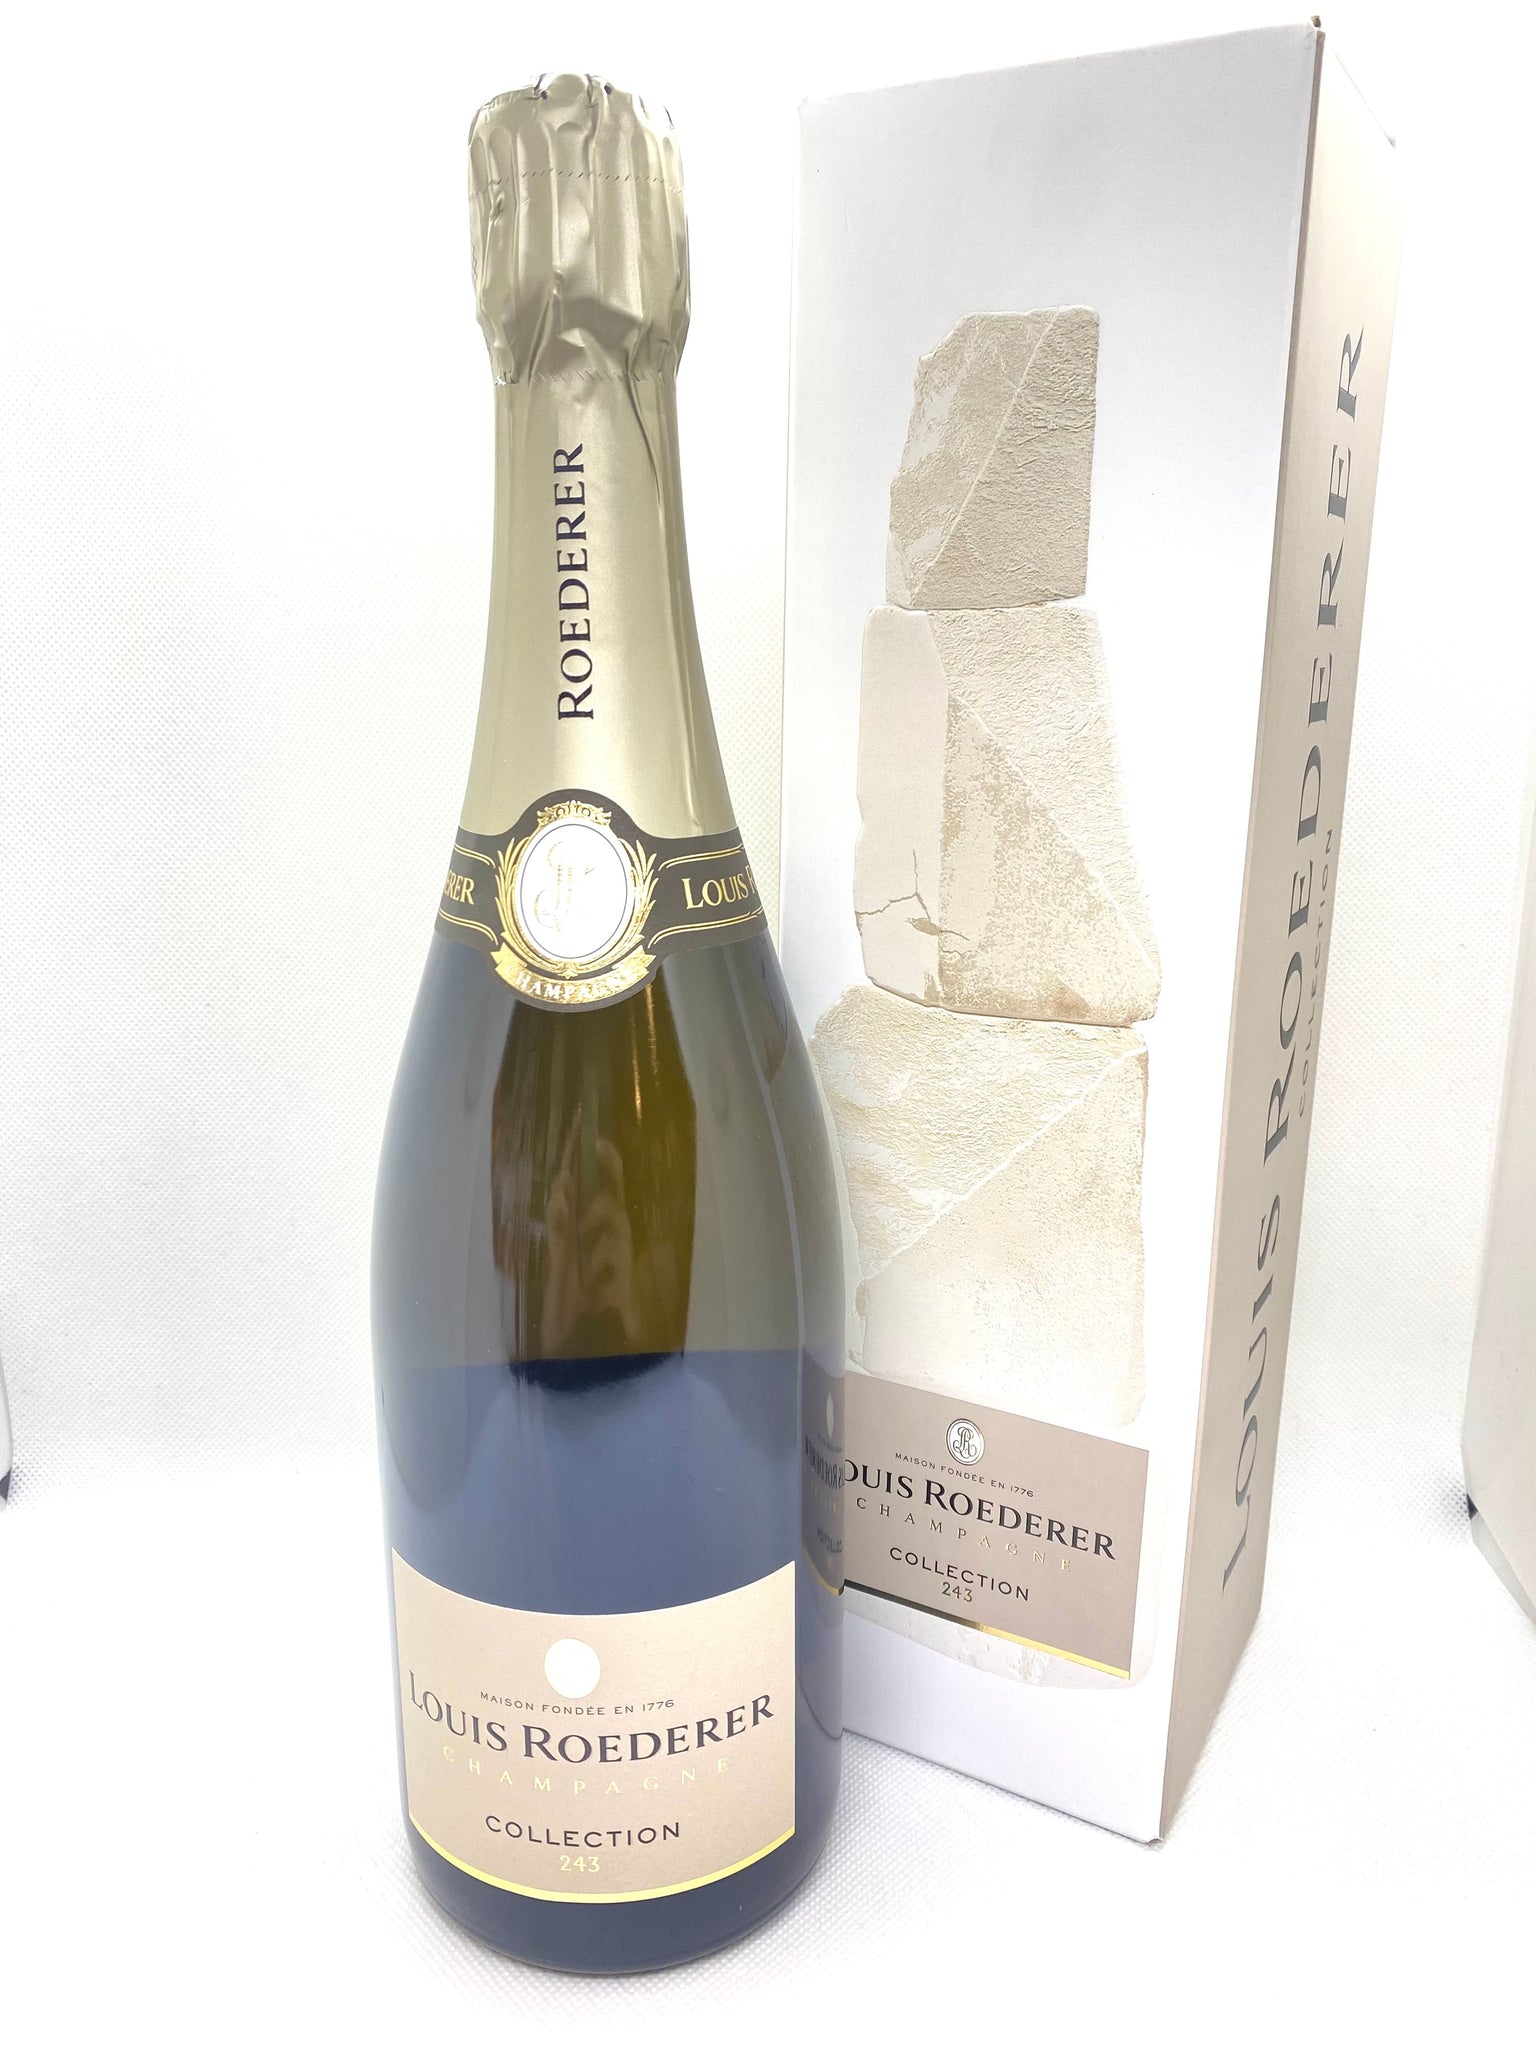 CHAMPAGNE ROEDERER BRUT COLLECTION 243 IN CASE